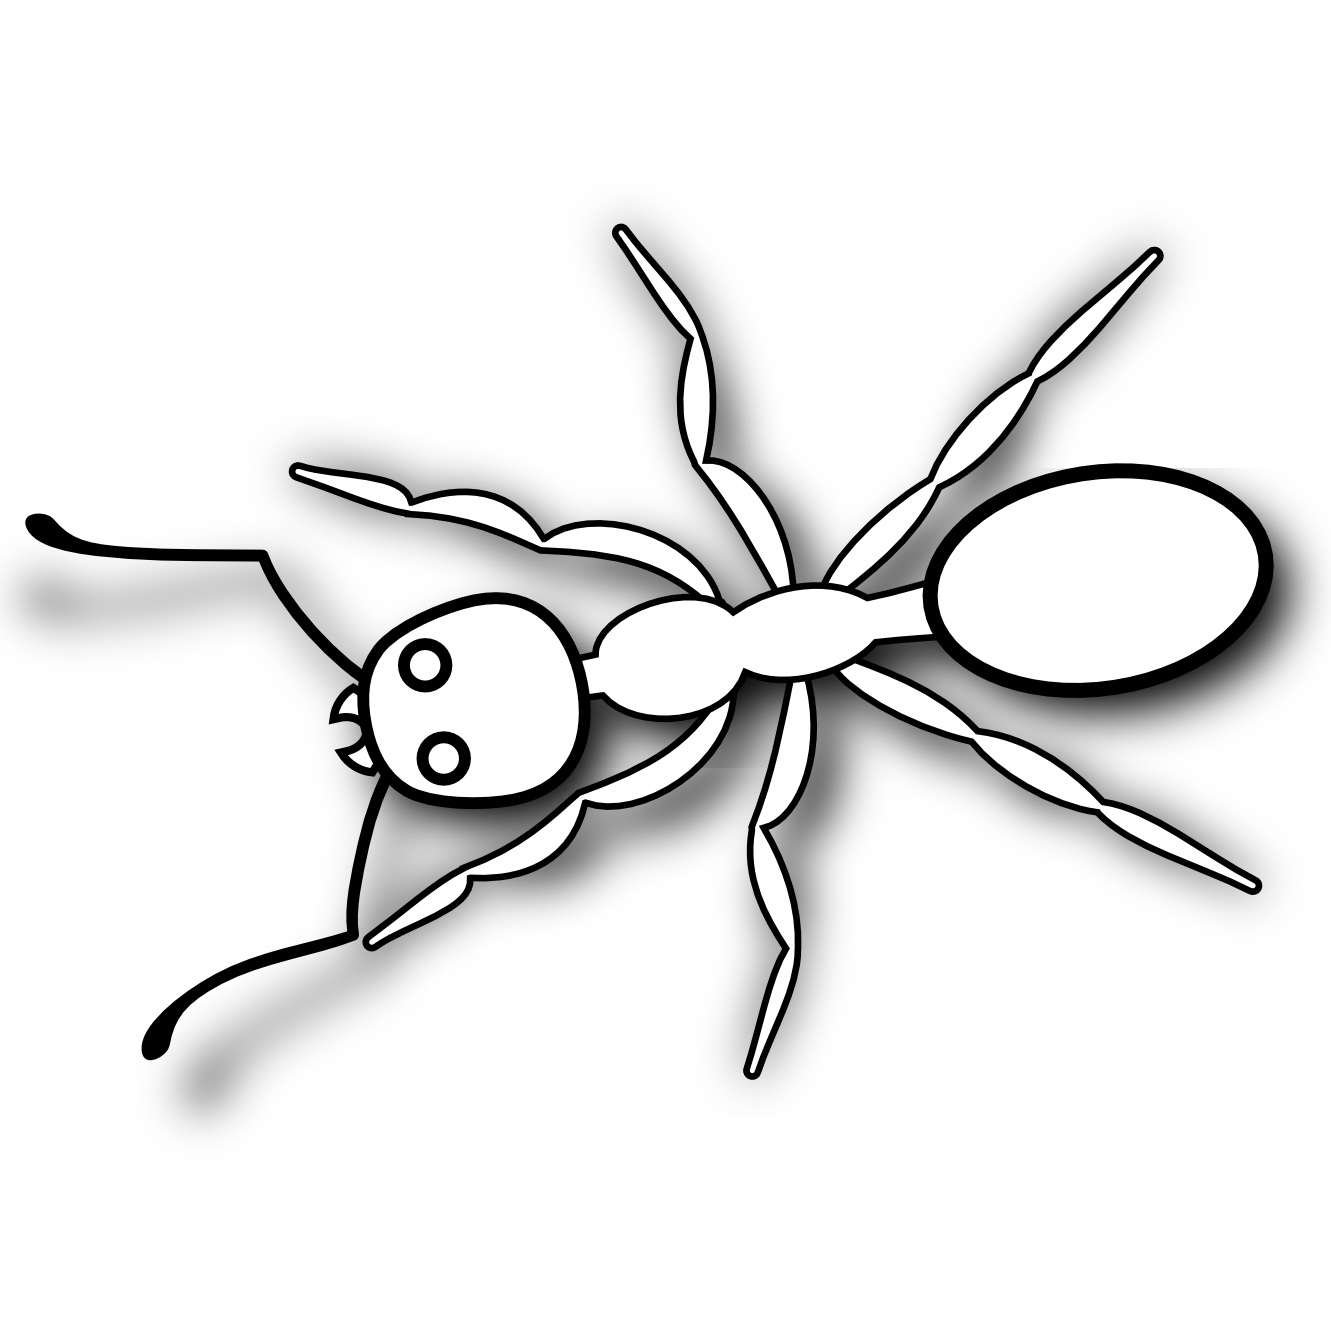 Ant clipart printable. Free pictures of ants